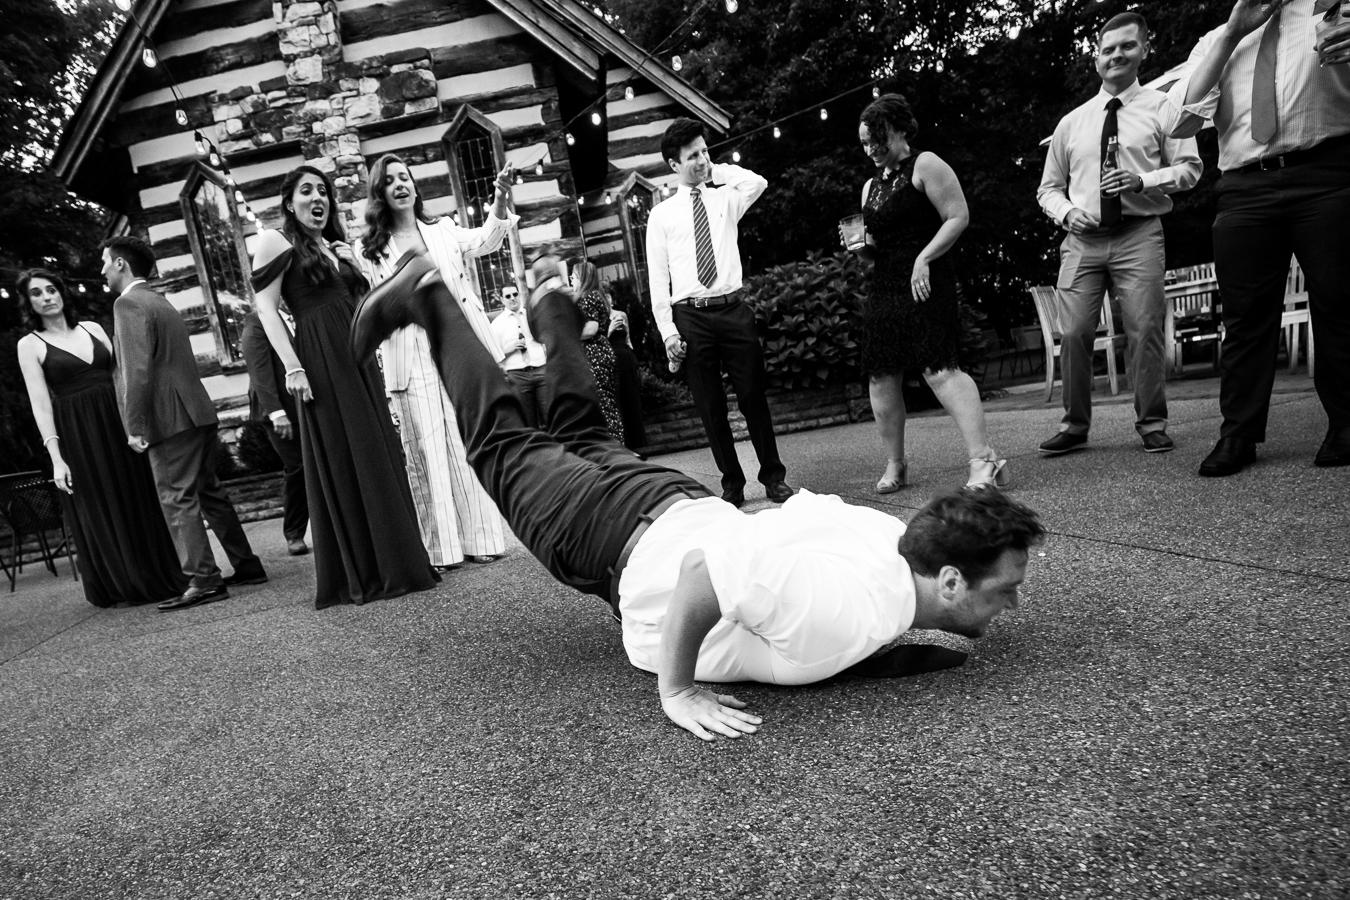 fun Oak Lodge reception photographer, rhinehart photography, captures this black and white image of a guest doing the worm as guest smiles and cheer him on from afar during this outdoor wedding reception 